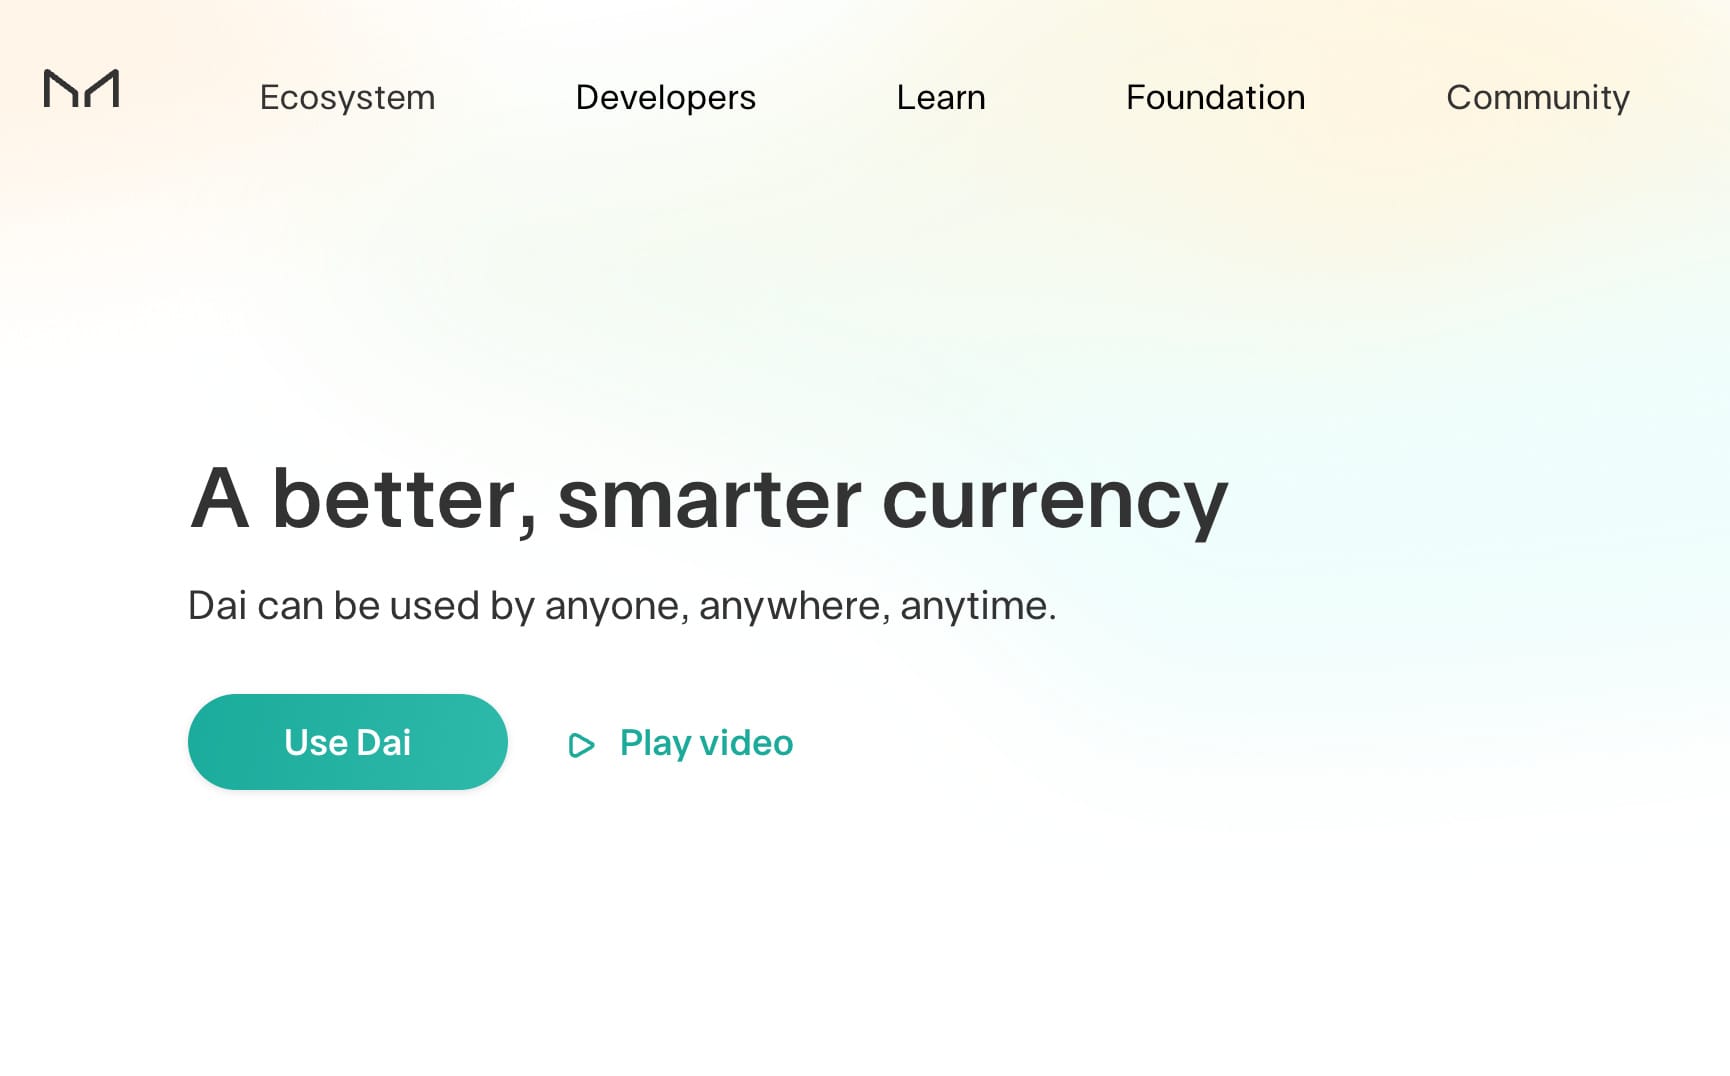 A webpage with the headline "A better, smarter currency" and the subhead, "Dai can be used by anyone, anywhere, anytime." There's a big green button that says "Use DAI", and a link next to it that says "Play video".